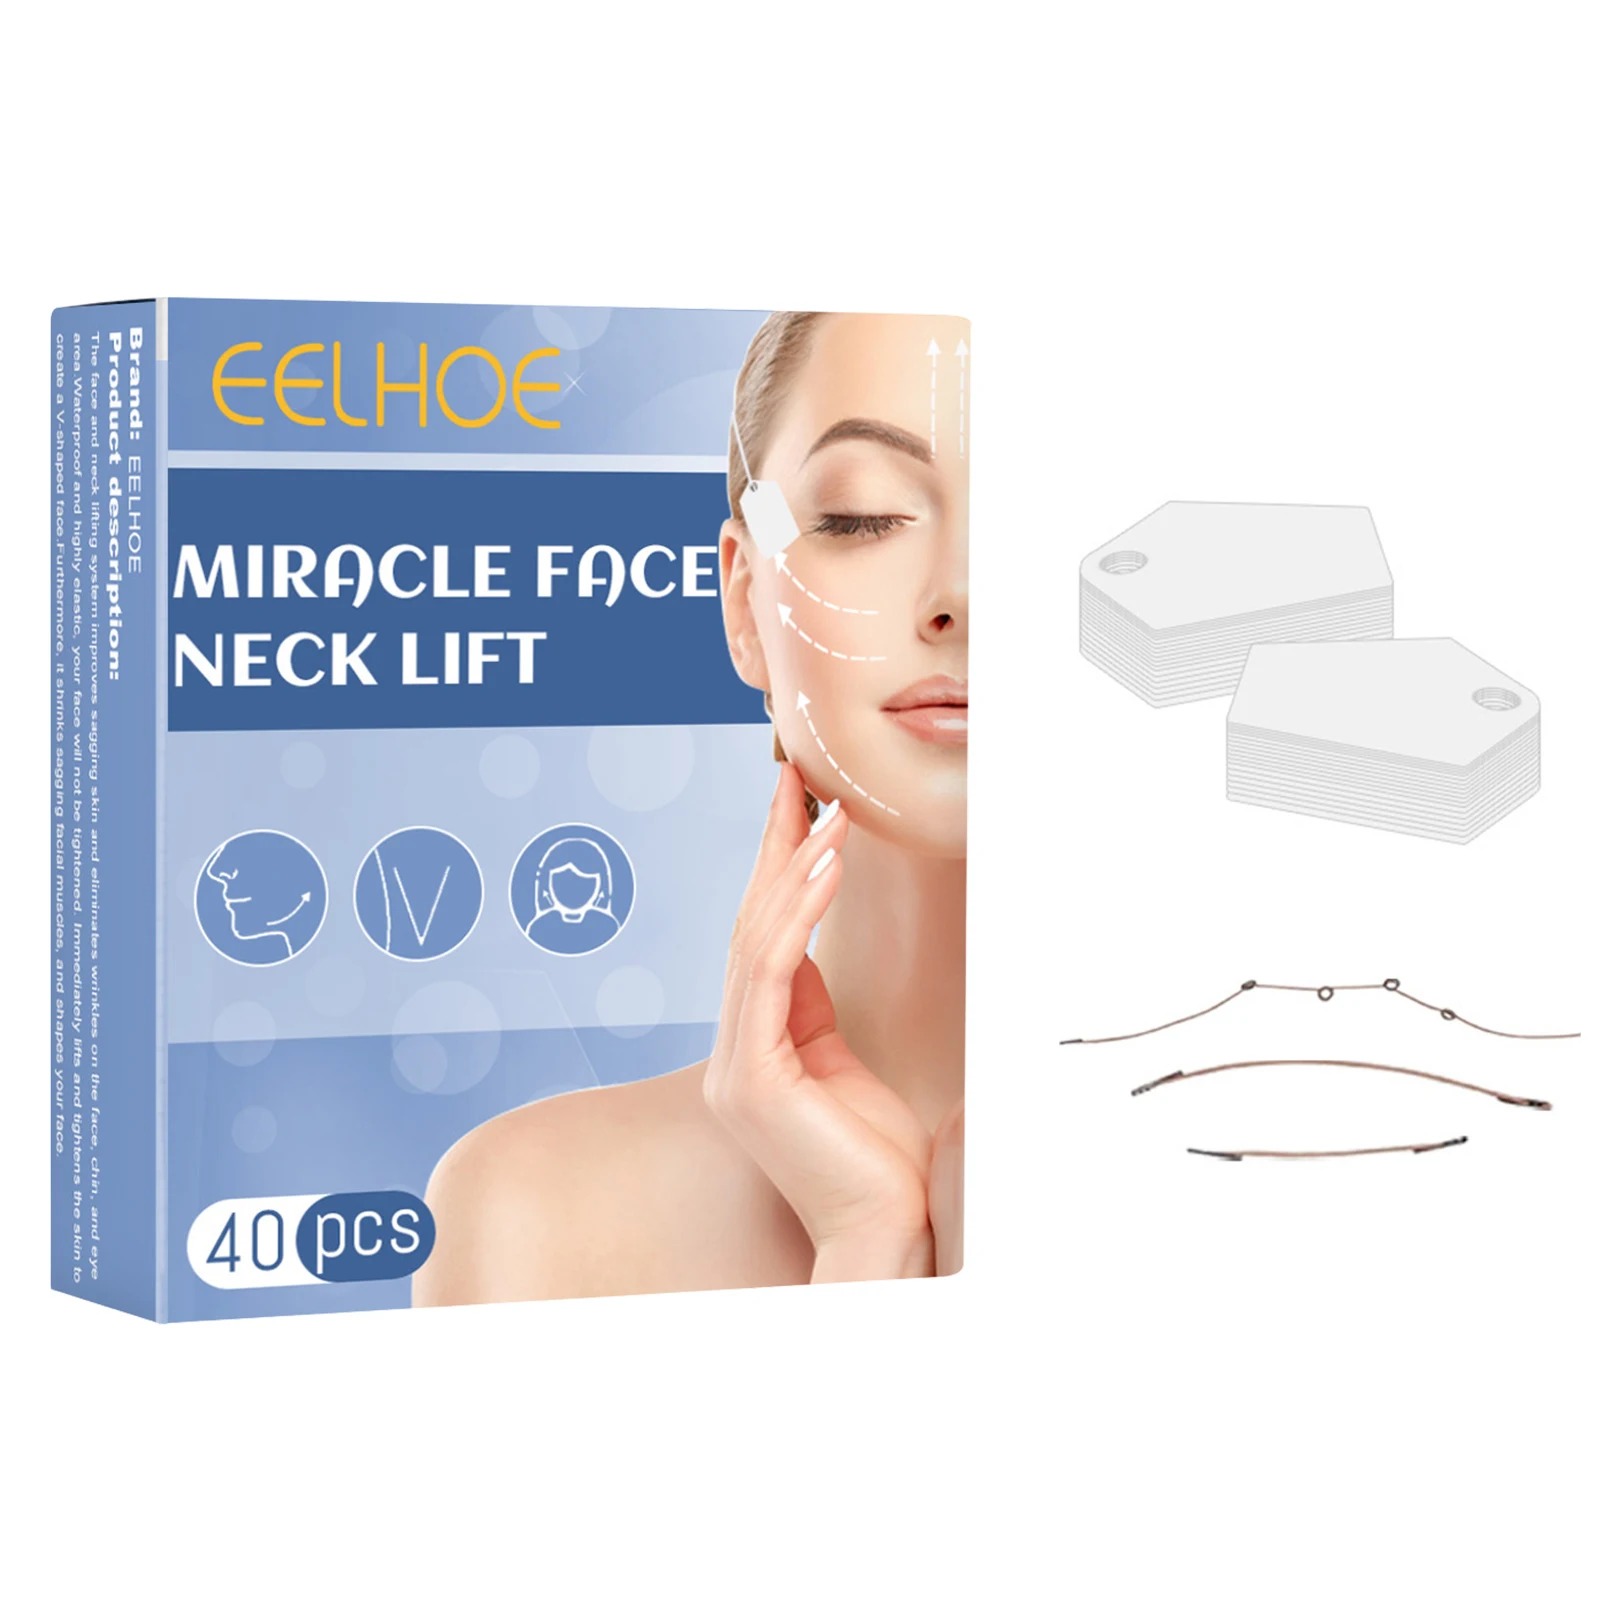 

Face Tape Double Chin Reducer Lift Patches Tools Invisible Makeup Face Lift Tapes 40 PCS Refill Tapes For Instant Neck Eye Lift